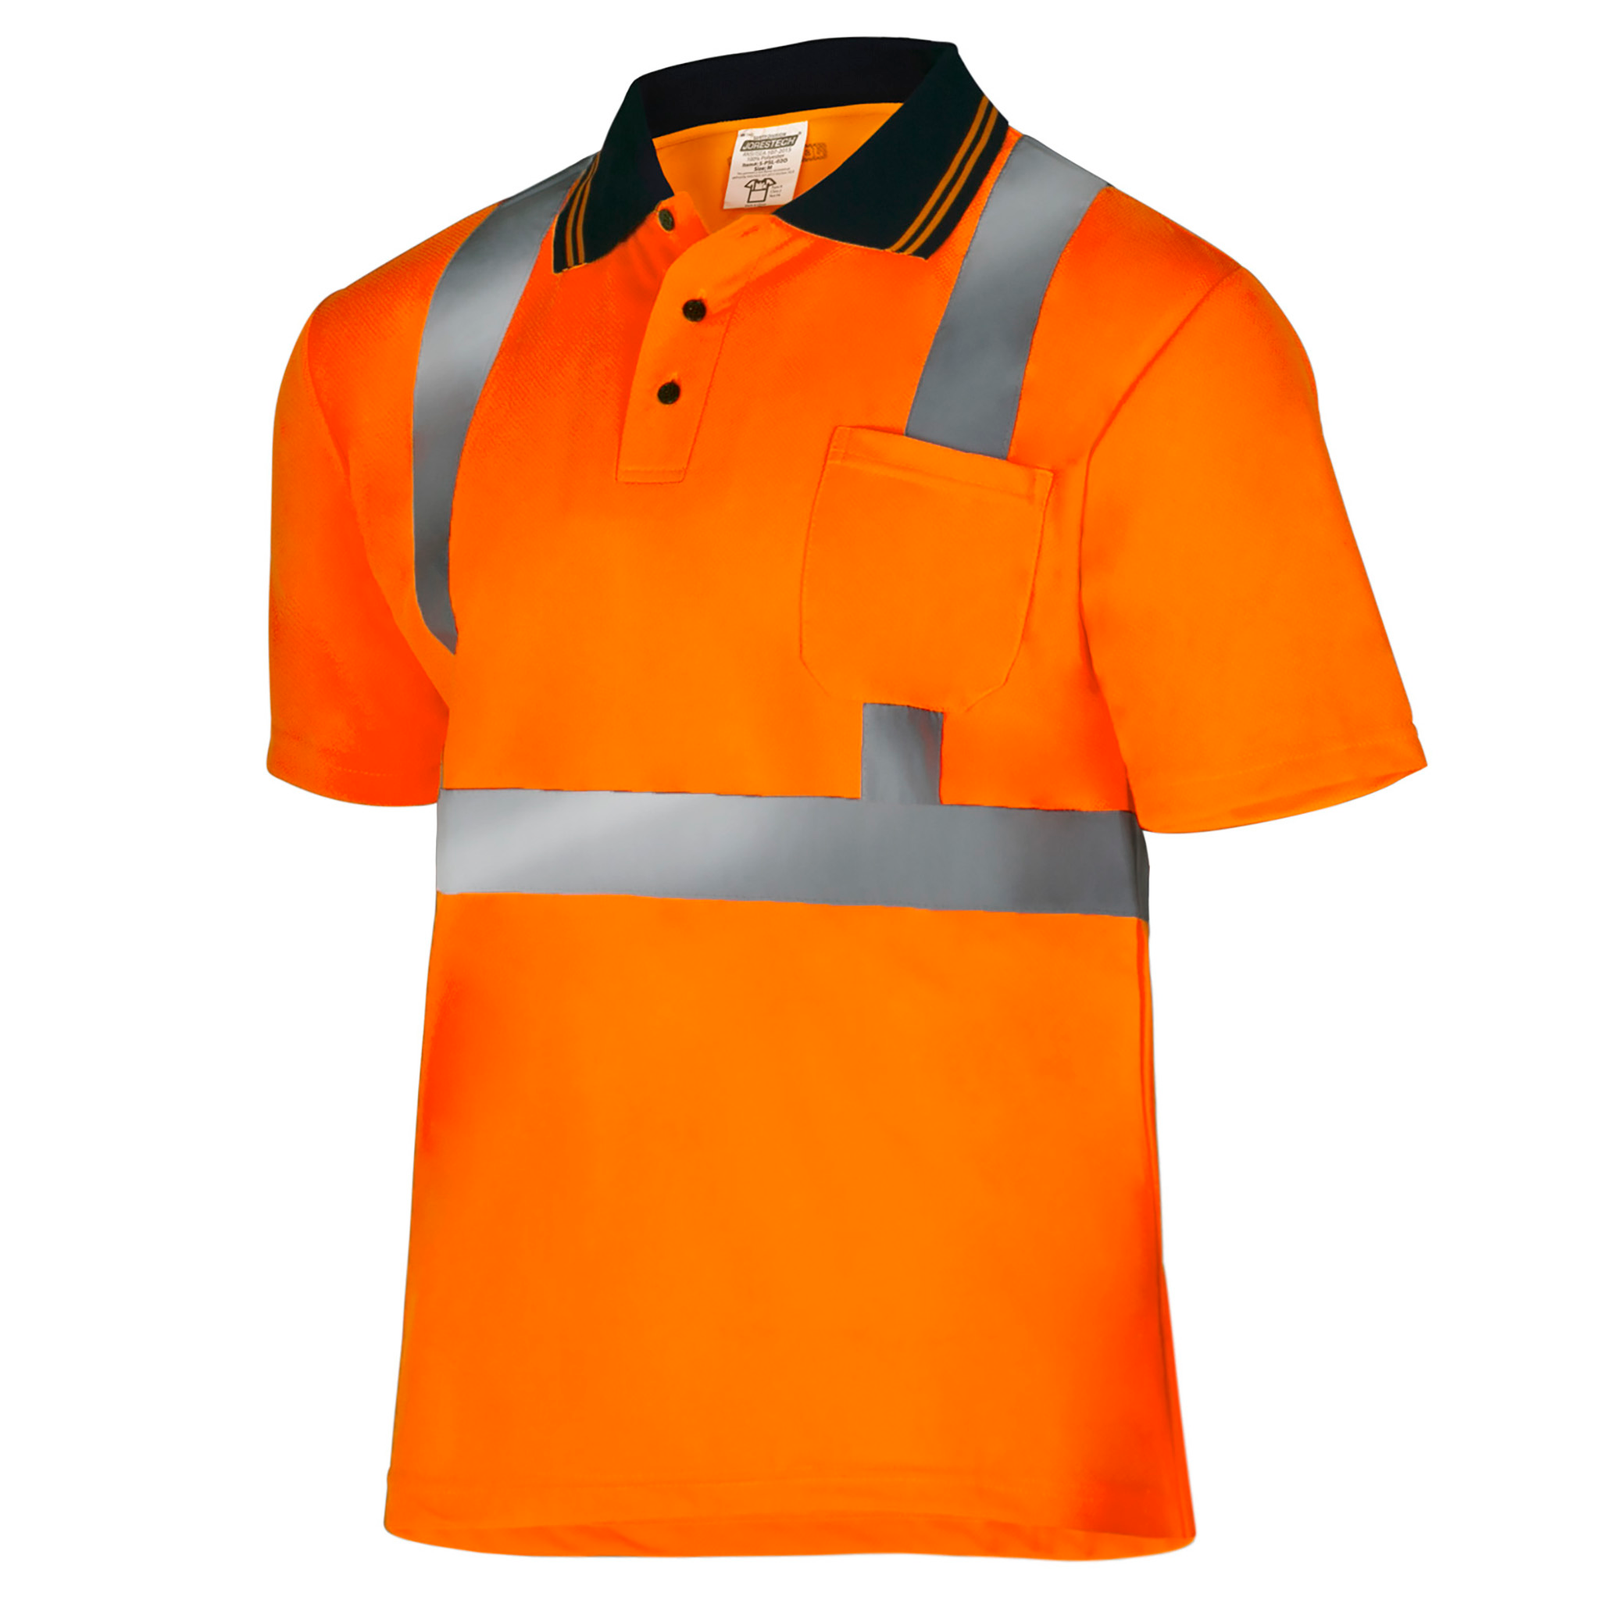 Diagonal view of a Hi-vis orange reflective safety polo shirt. The shirt is short sleeve, has a polo collar and 2 buttons ANSI compliant class 2 type R.